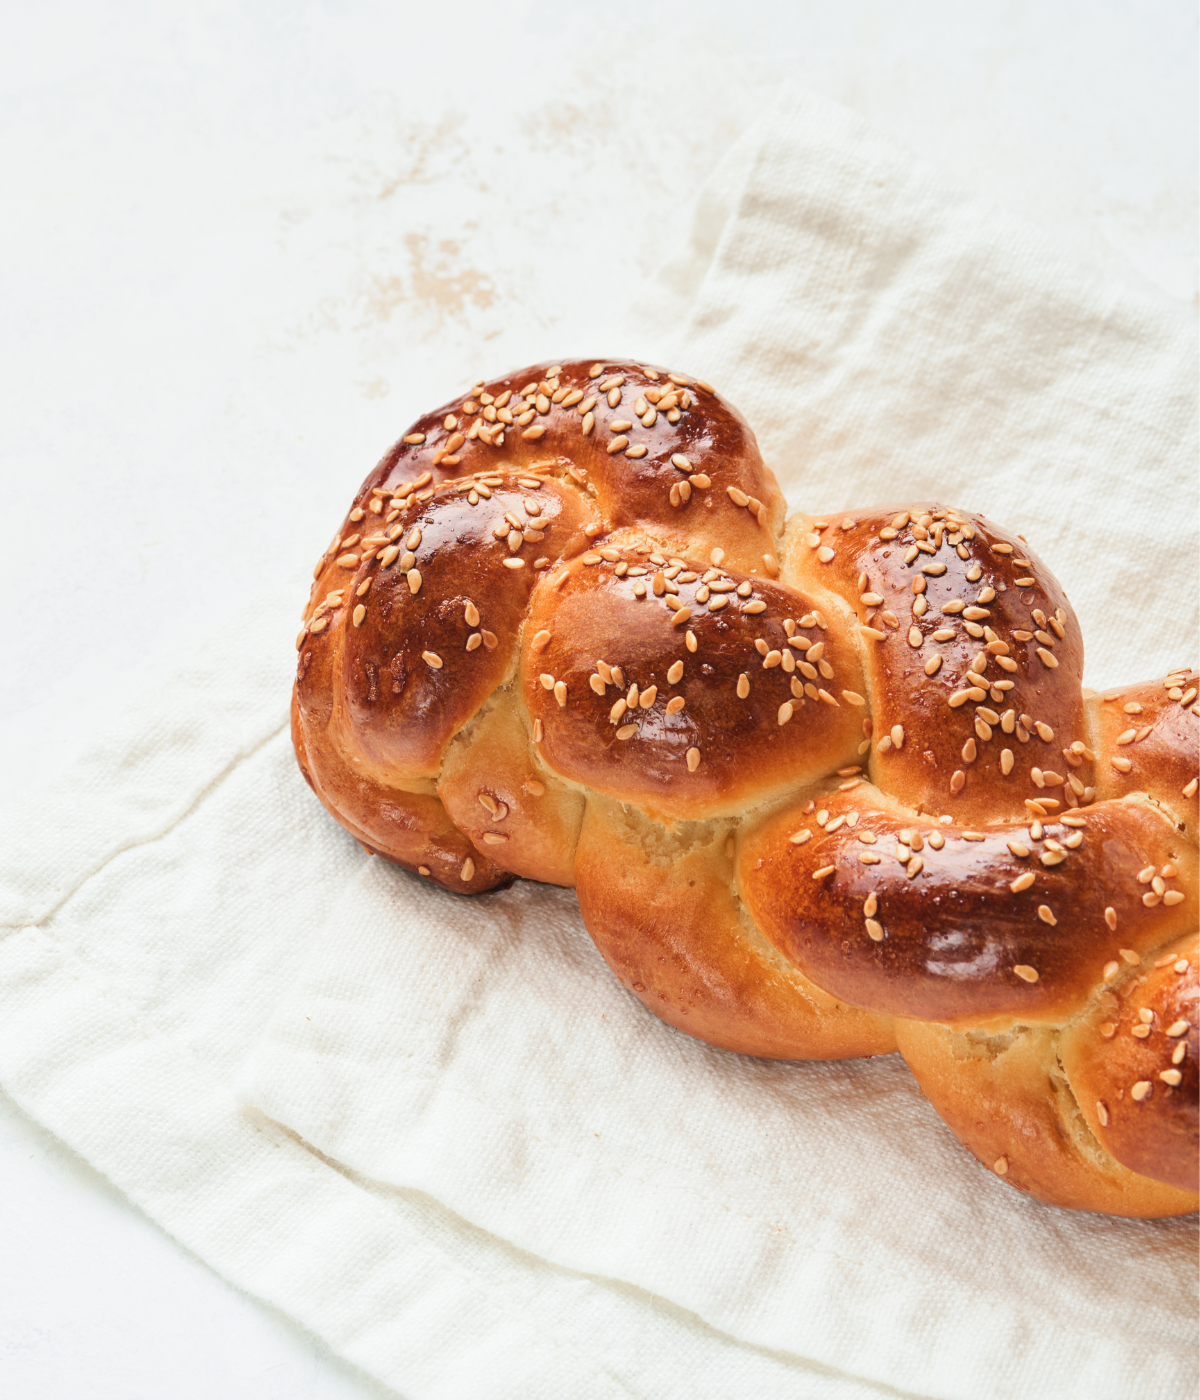 Iron-Enriched Challah Bread